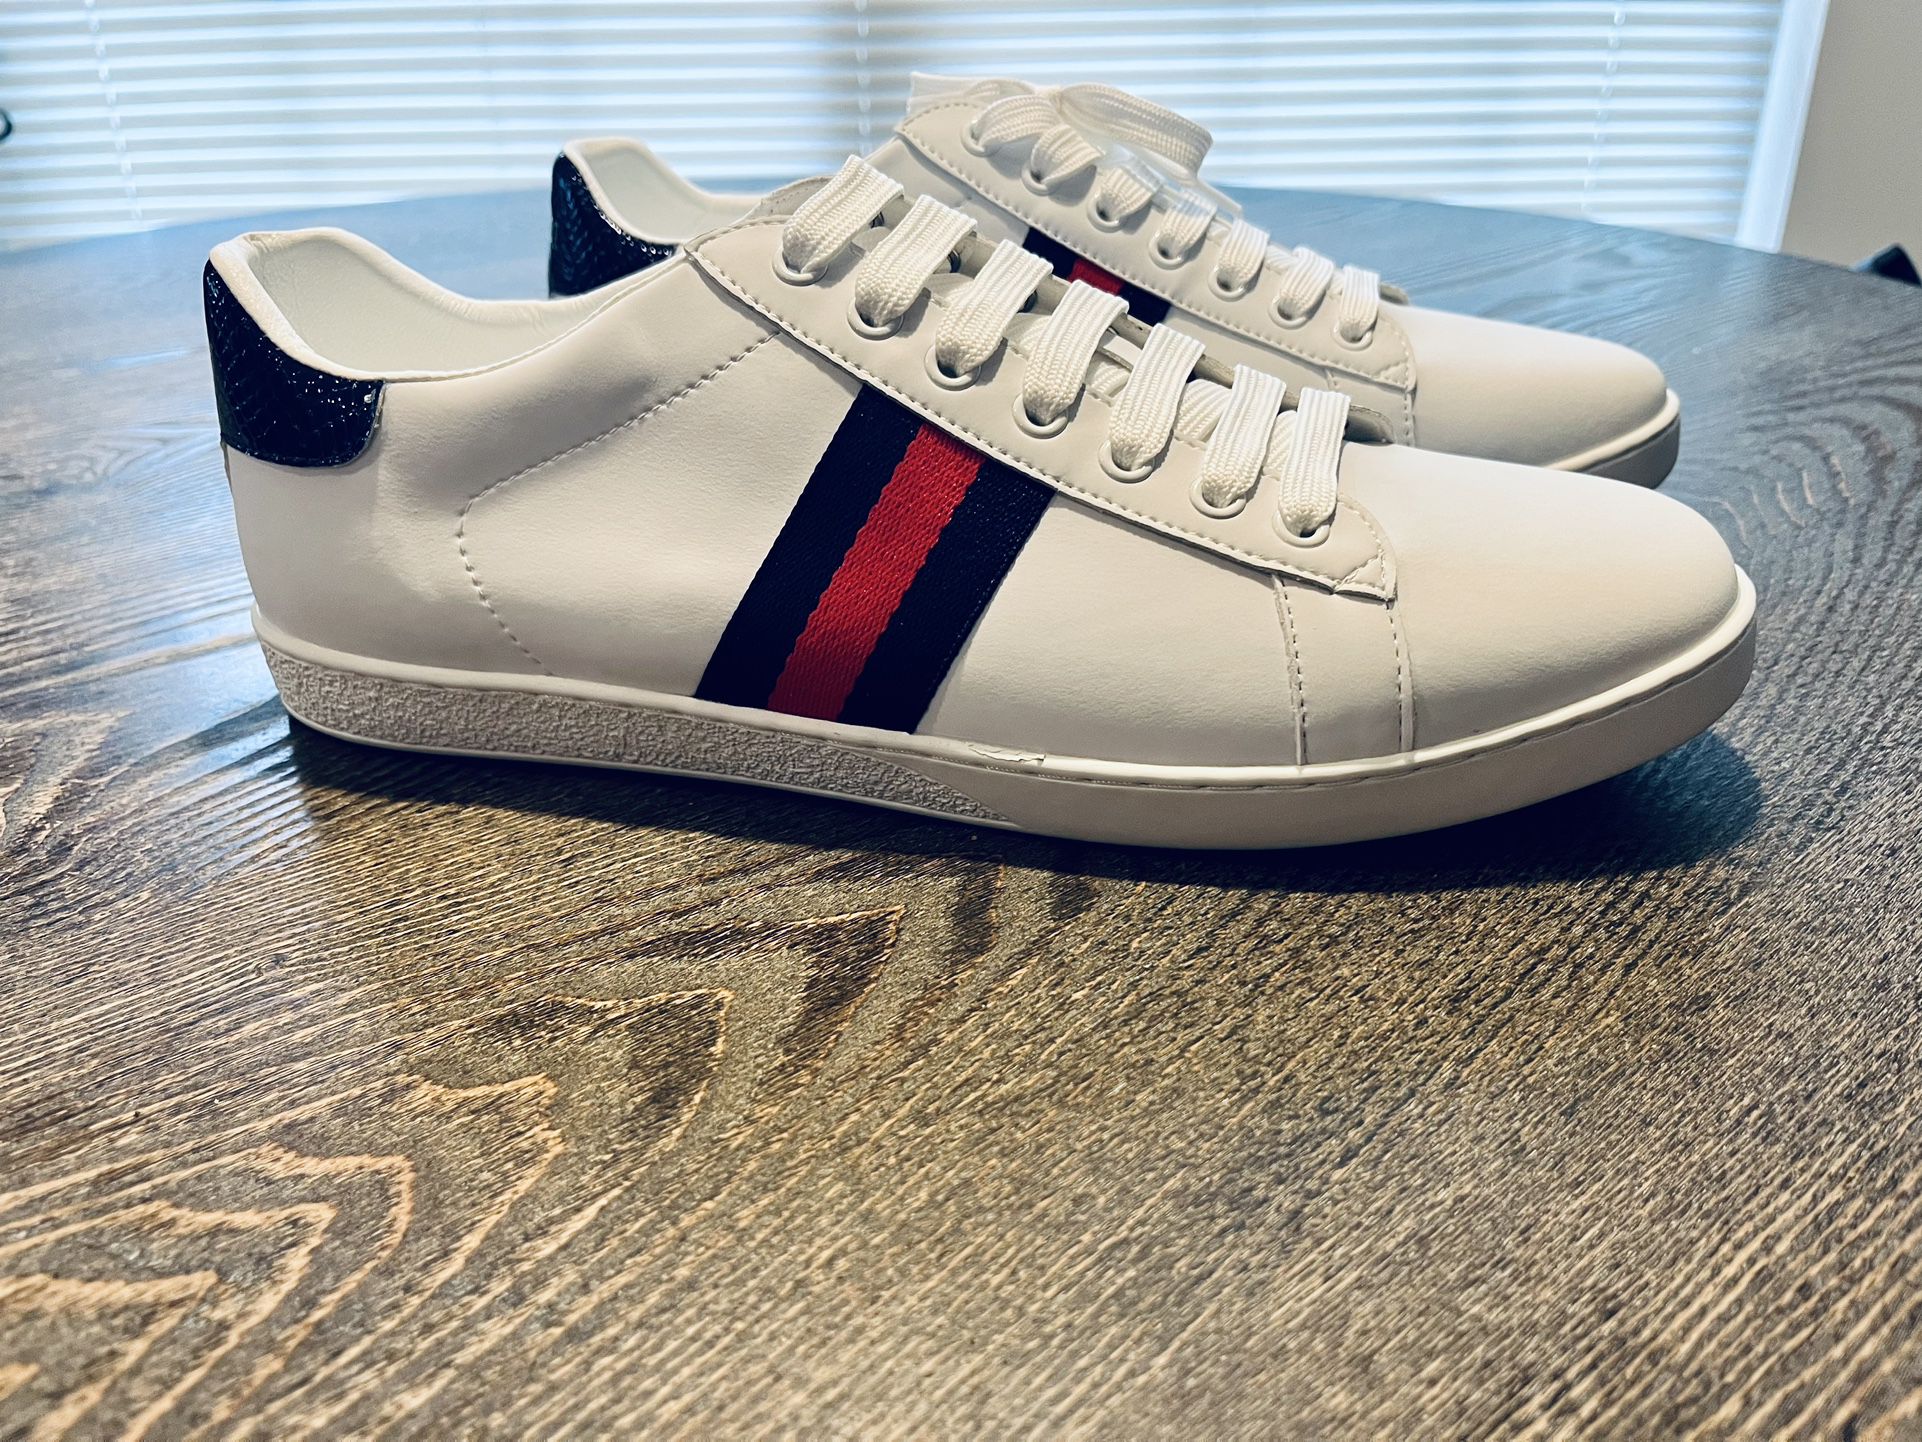 Gucci Ace Sneakers Size 10 1/2